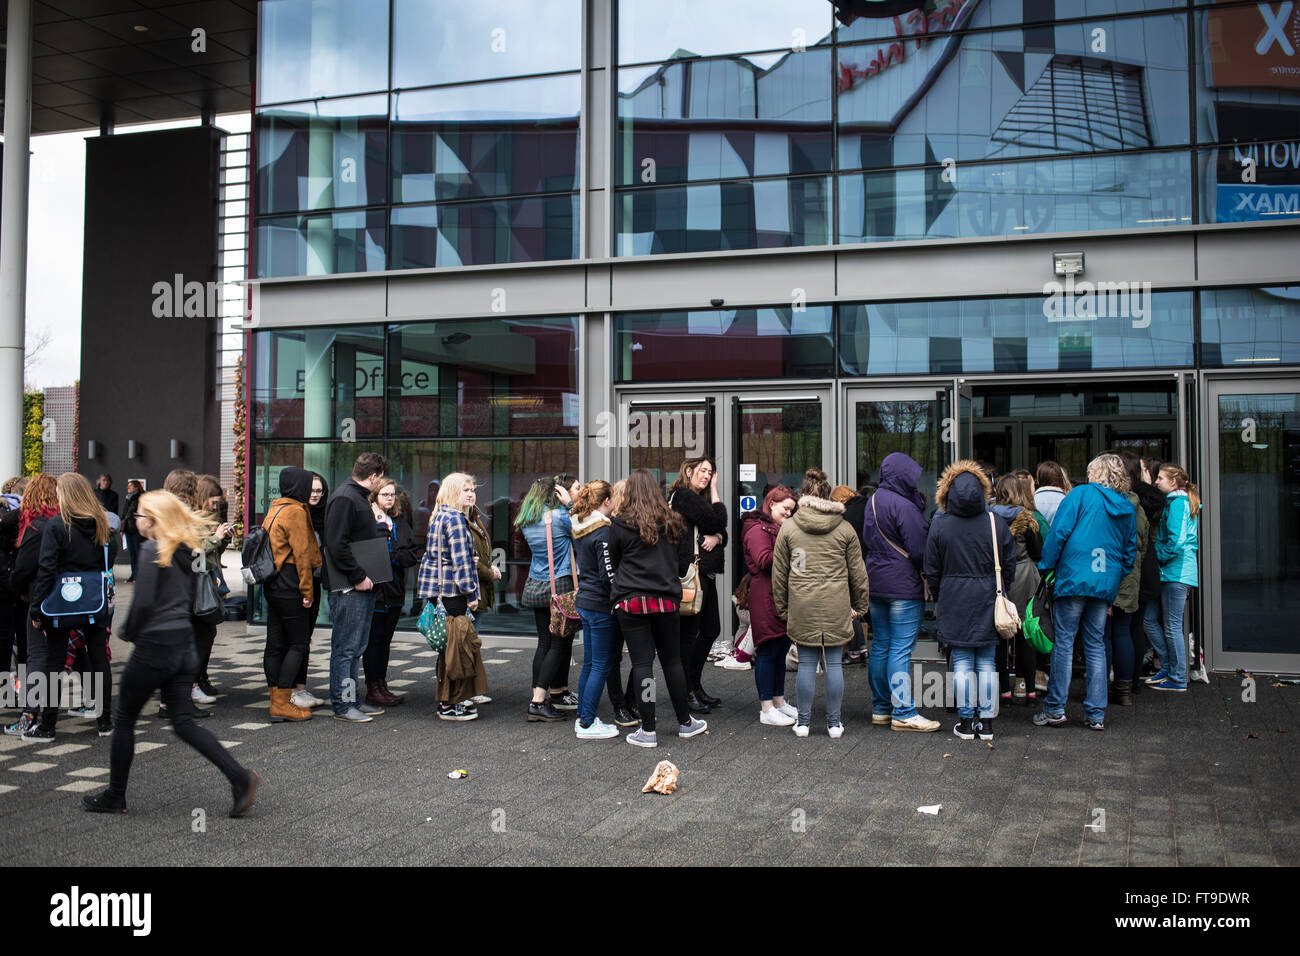 Birmingham, UK. 26th Mar, 2016. People queuing up to get signed photo's of The Vamps before their concert tonight. Credit:  steven roe/Alamy Live News Stock Photo